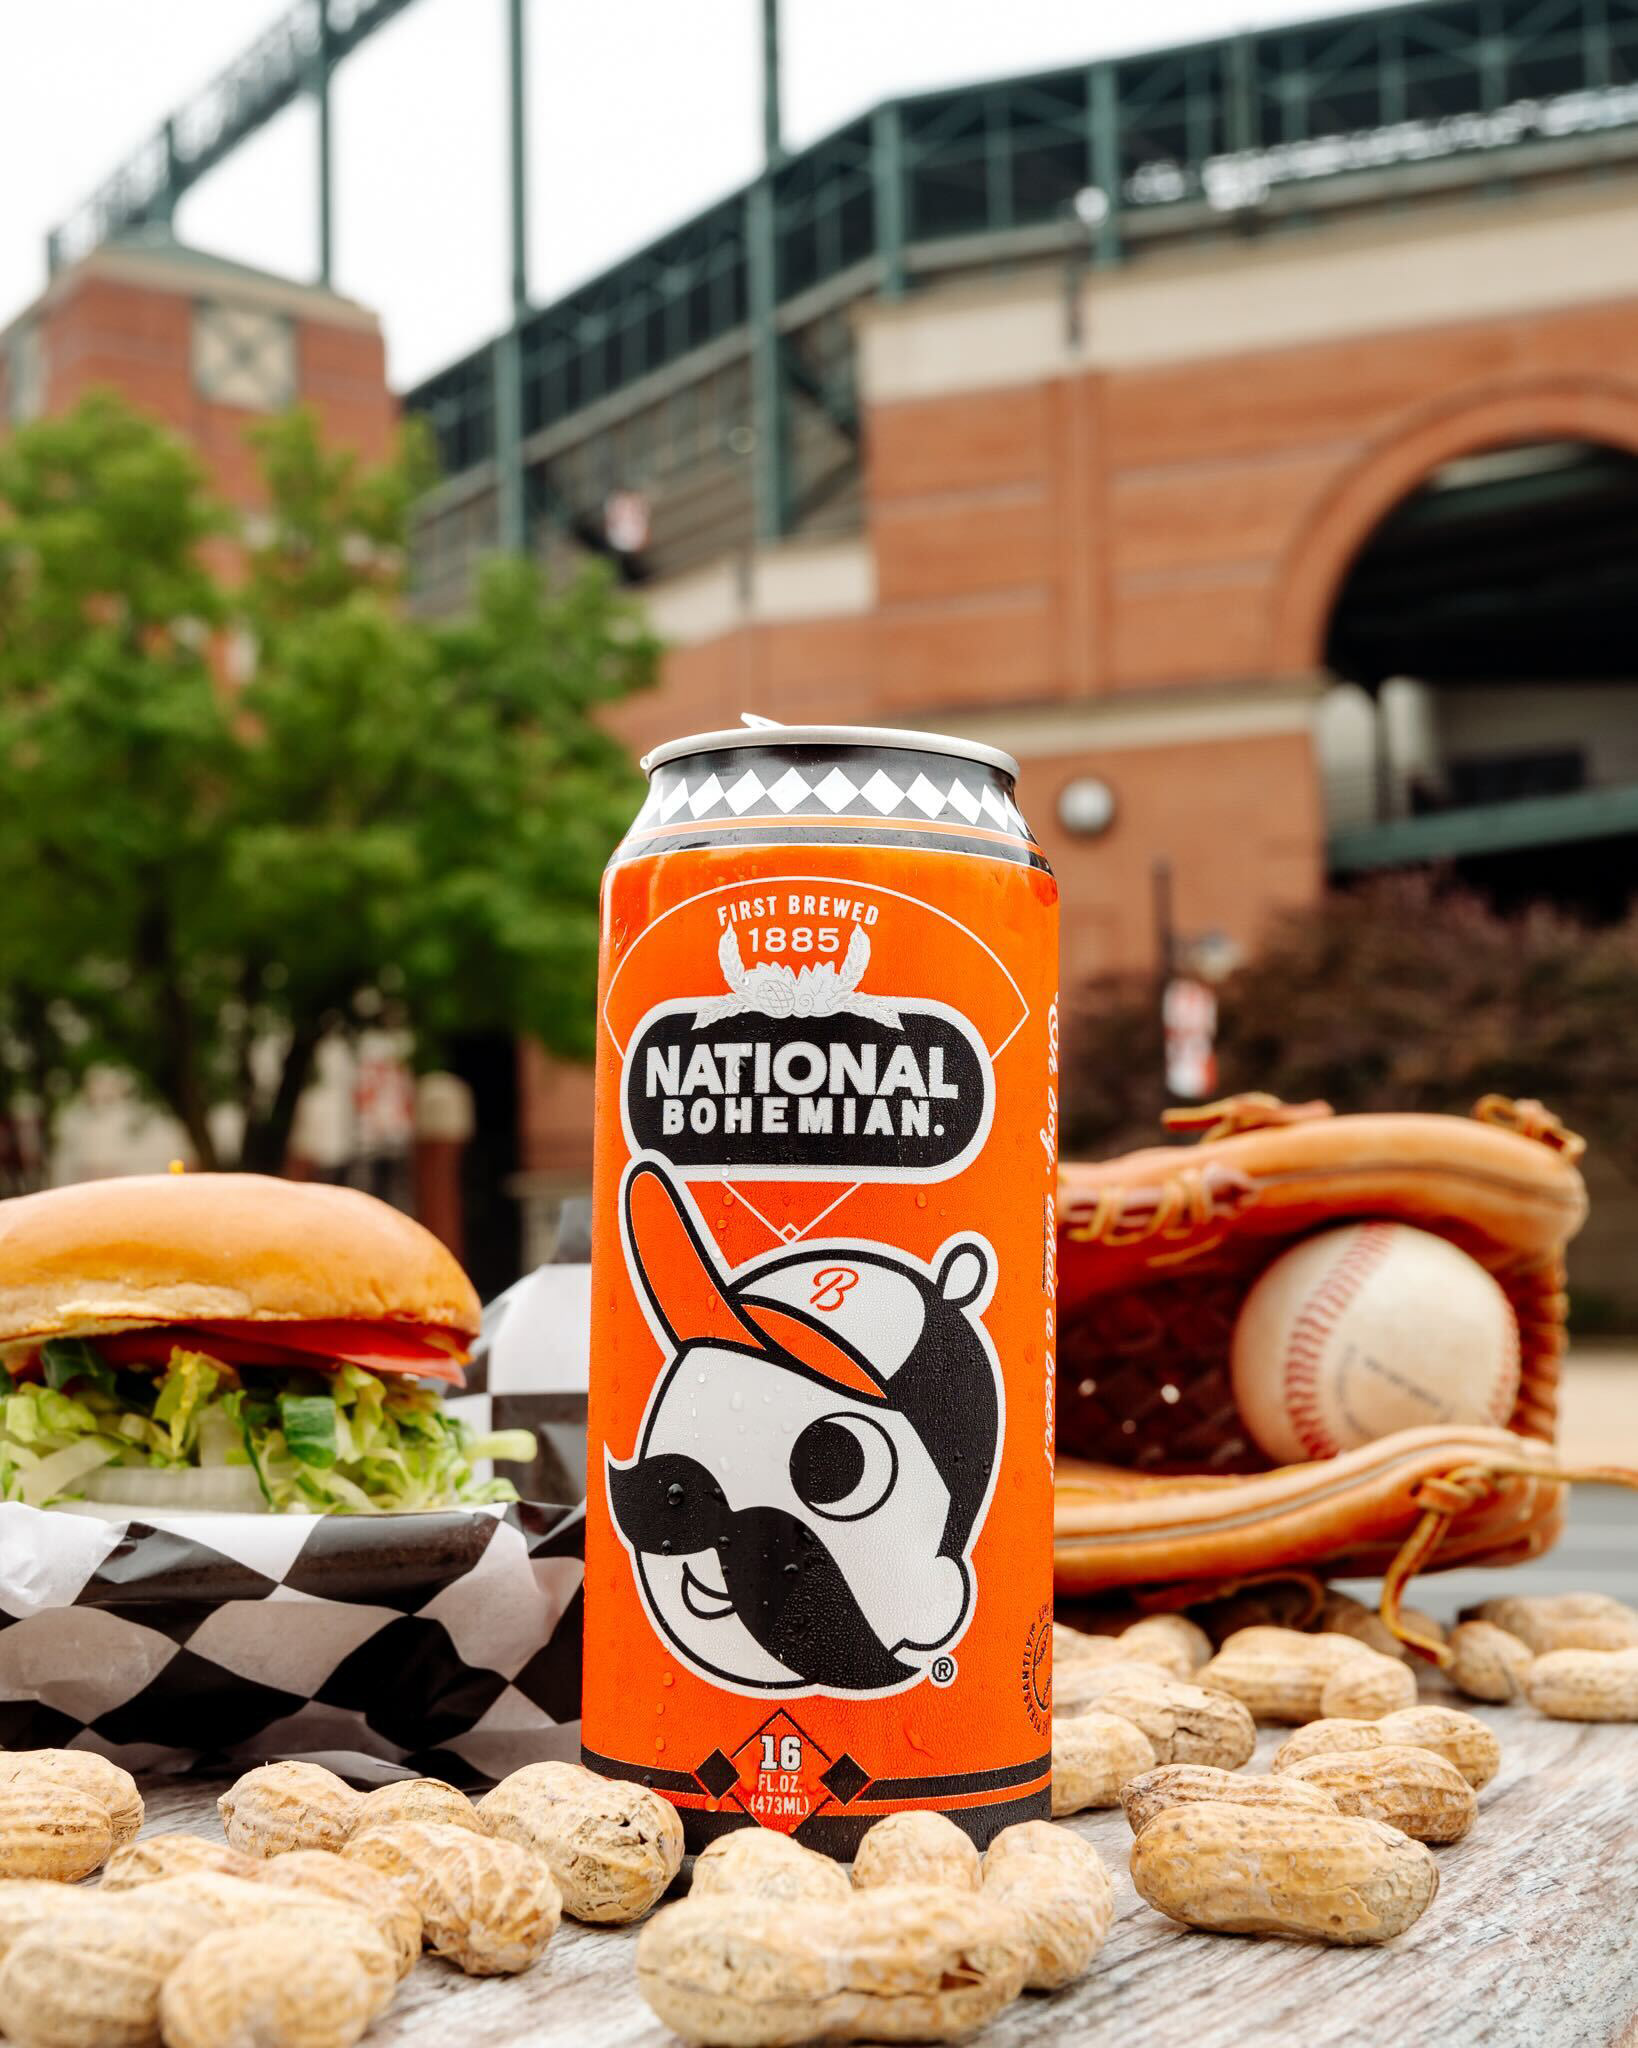 The new Natty Boh cans that will be sold exclusively at Camden Yards and sold there for the first time since 2016. Courtesy of Infamous PR